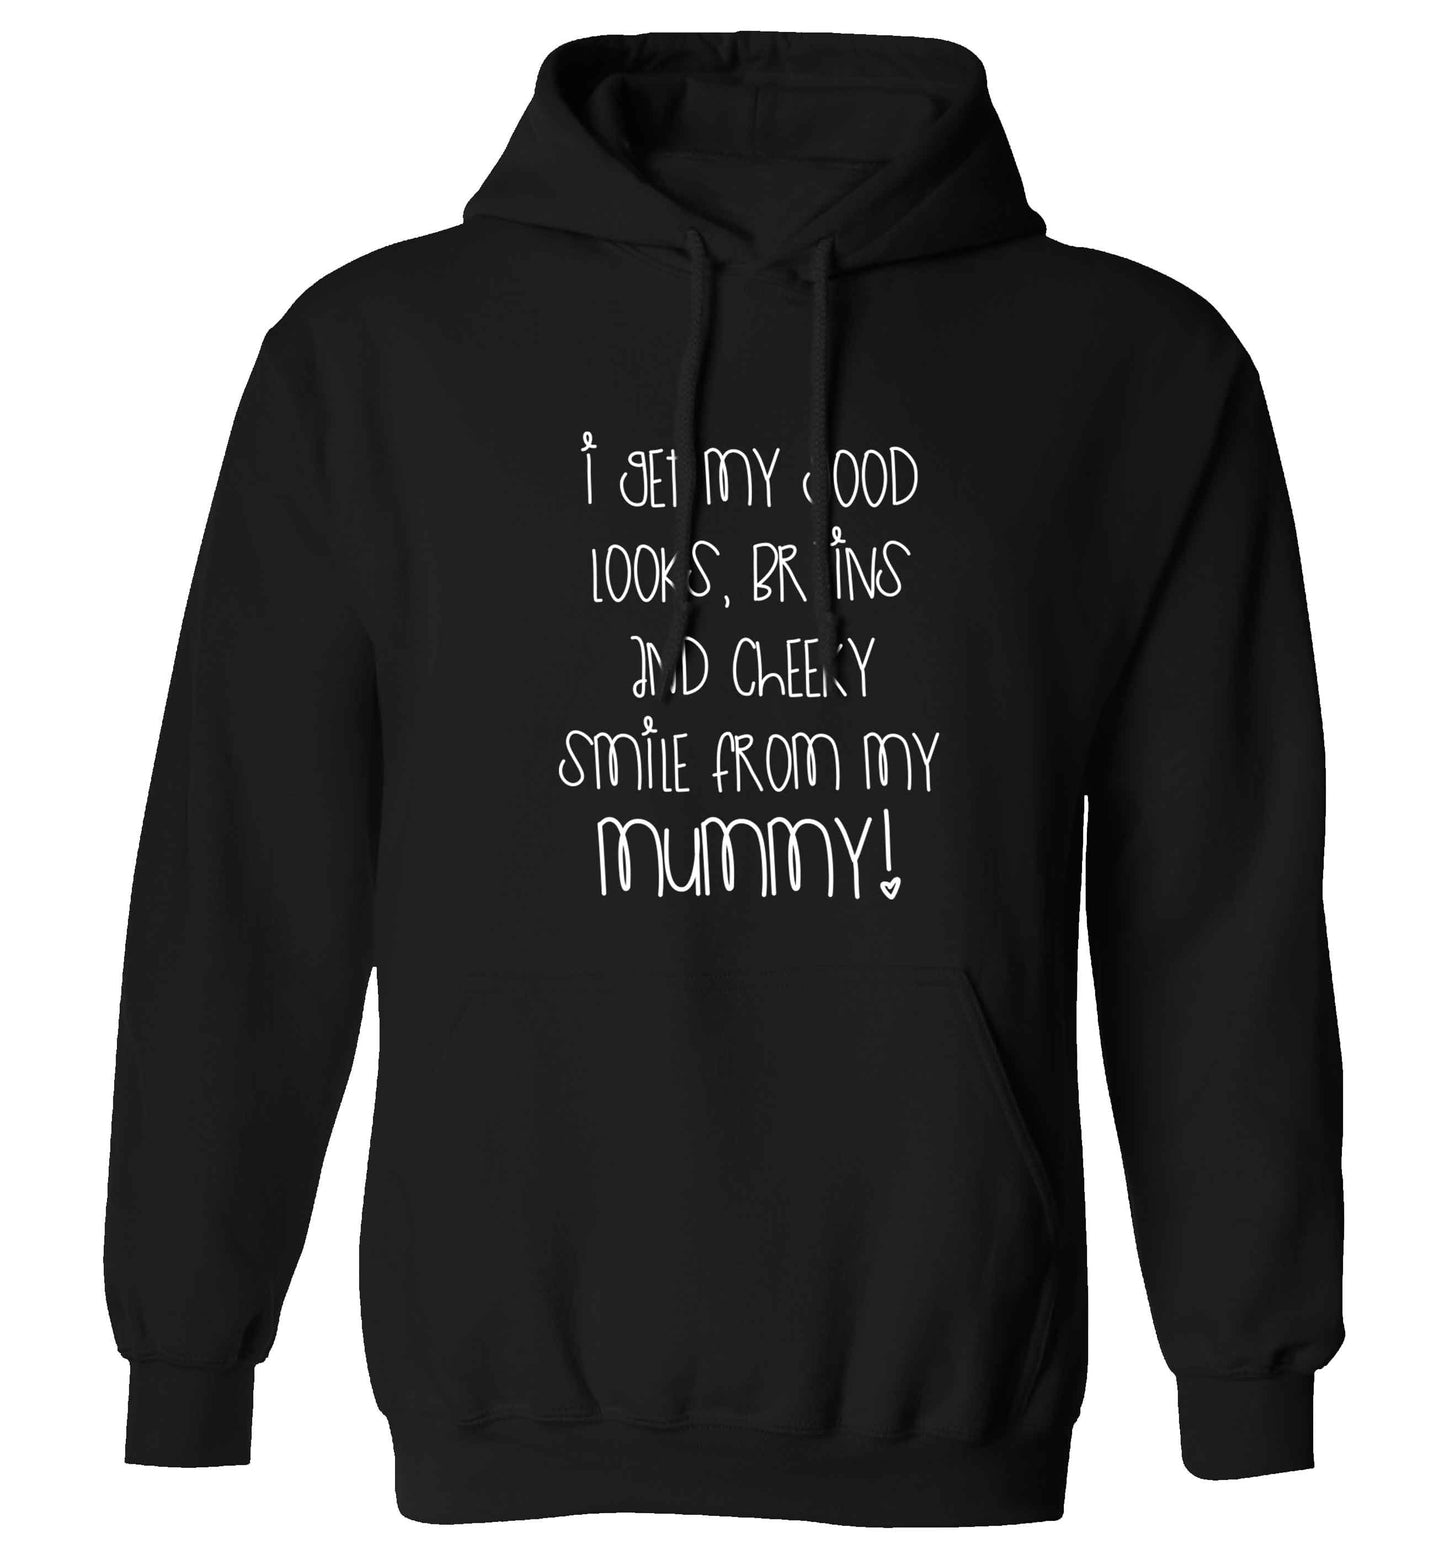 I get my good looks, brains and cheeky smile from my mummy adults unisex black hoodie 2XL